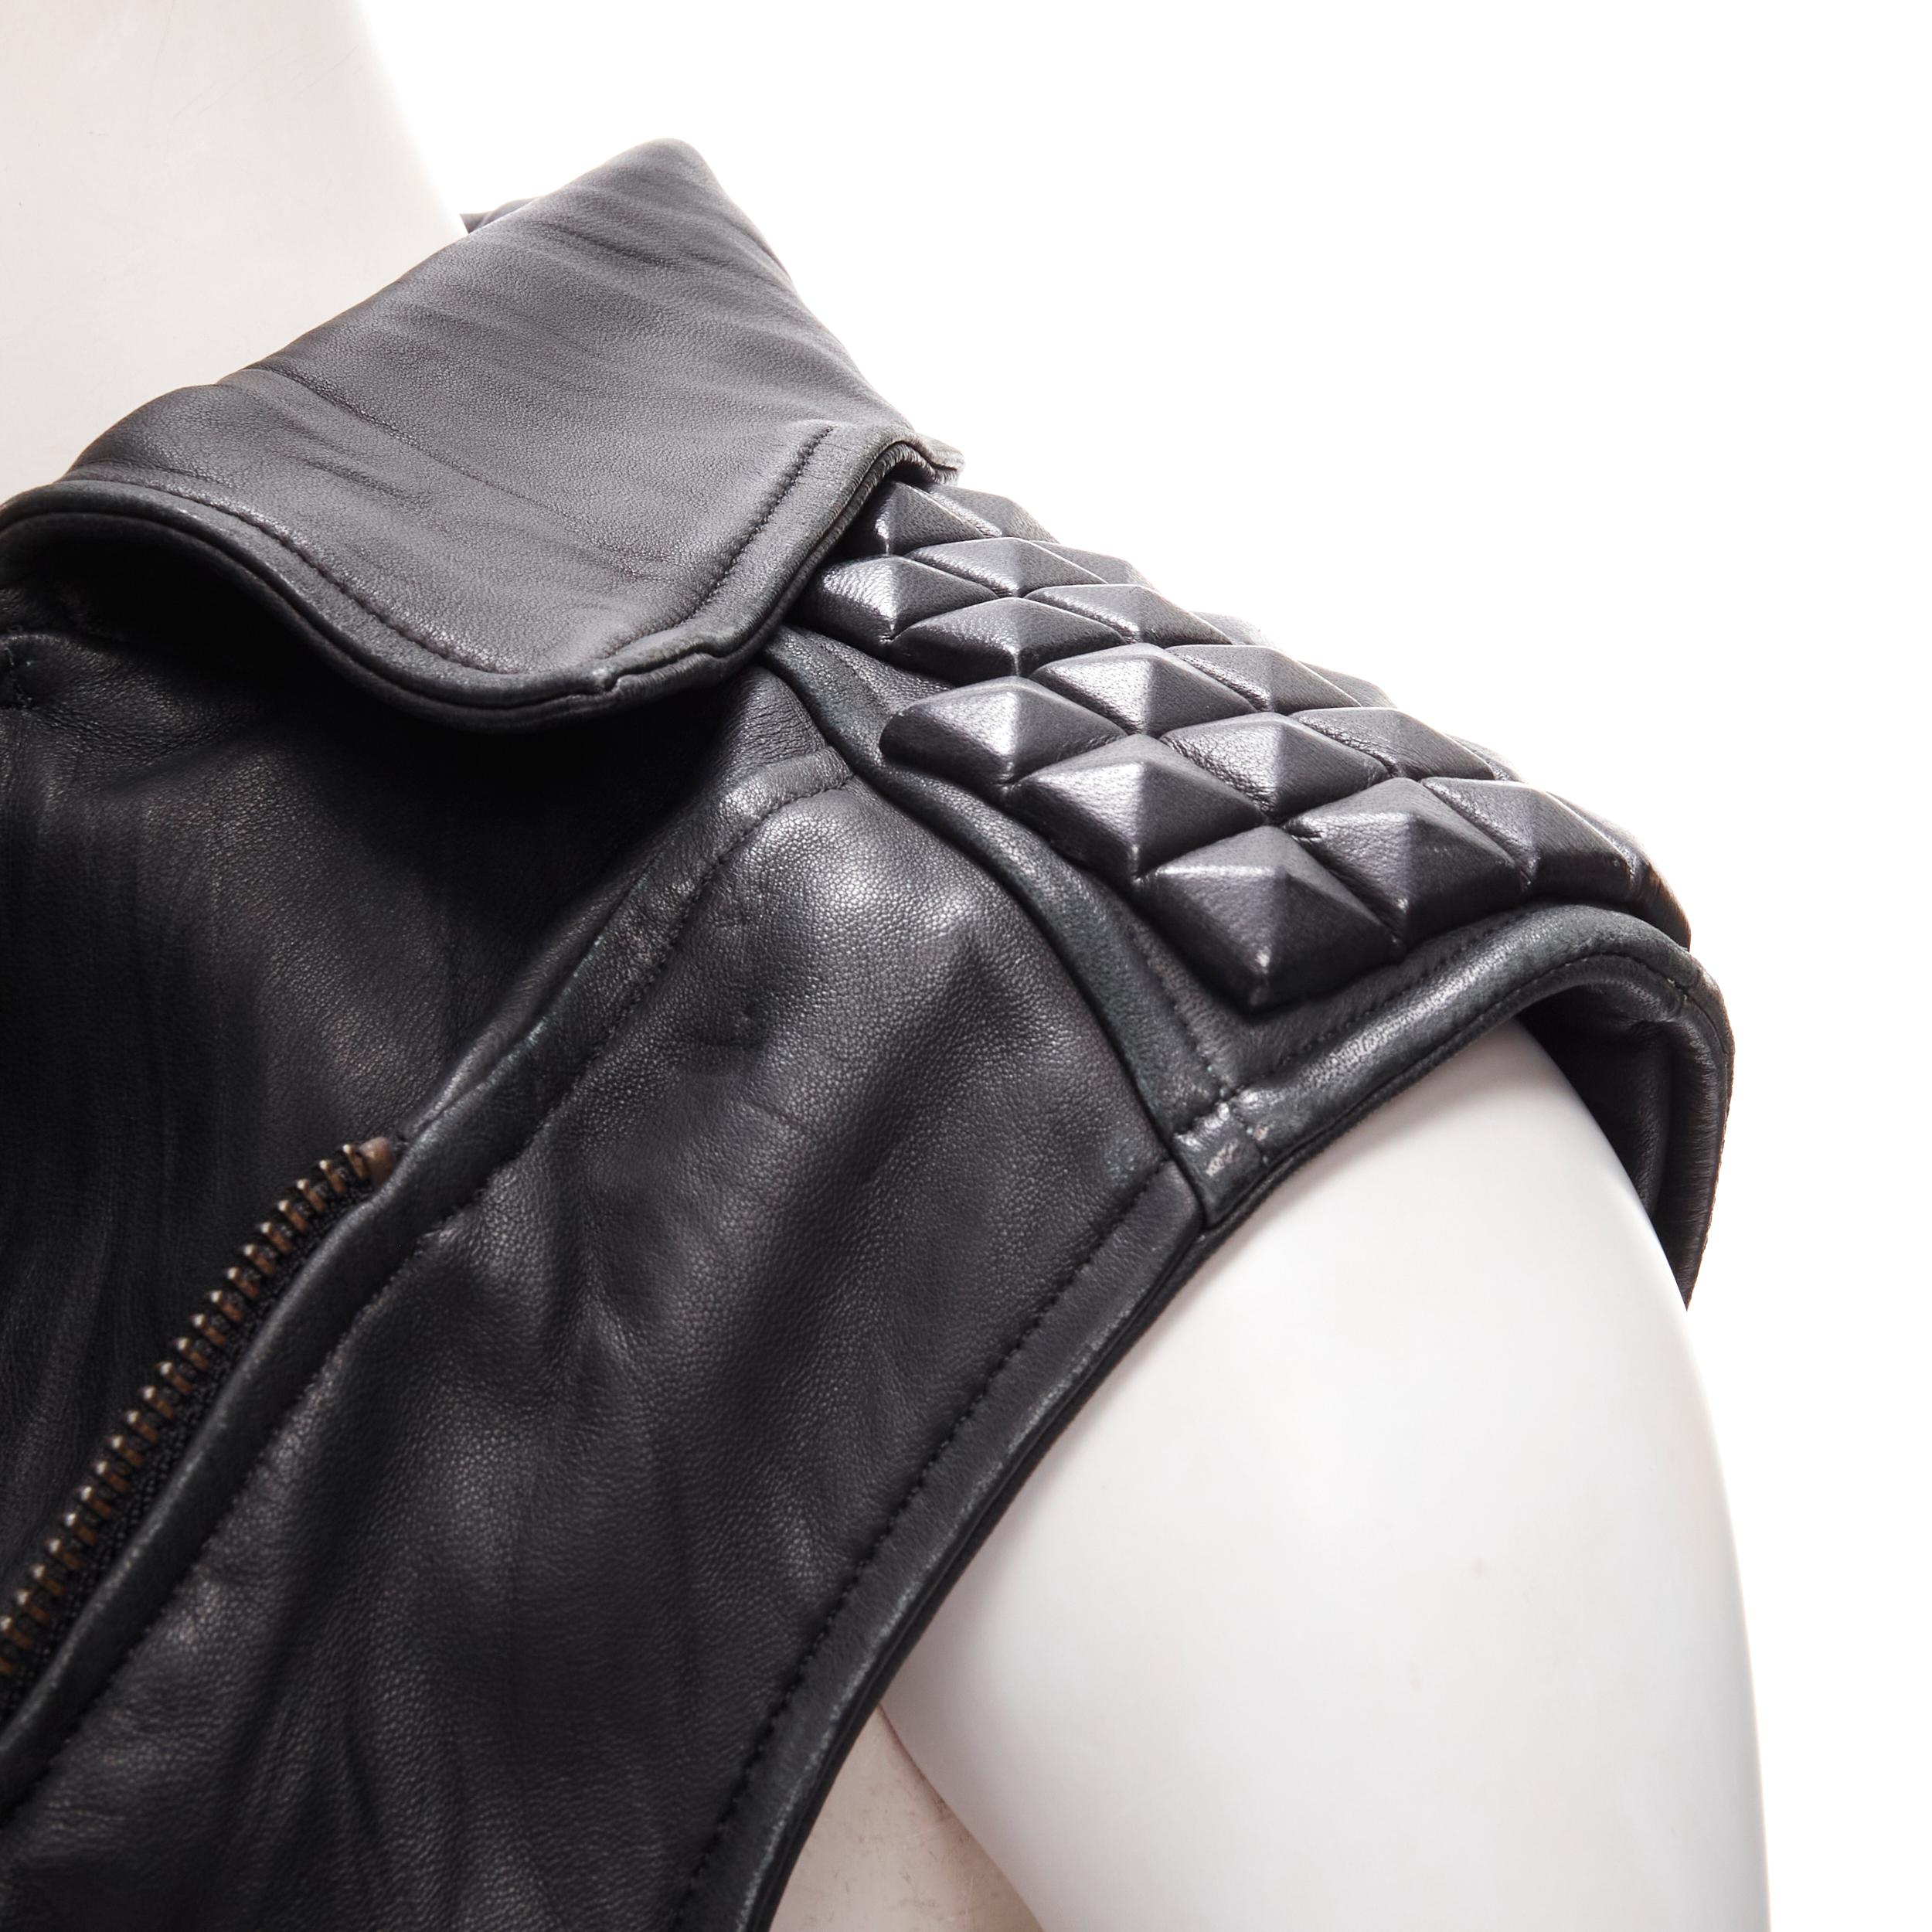 ELIZABETH JAMES black leather wrapped square stud biker vest jacket XS 
Reference: ANWU/A00688 
Brand: Elizabeth James 
Material: Leather 
Color: Black 
Pattern: Solid 
Closure: Zip 
Extra Detail: Leather wrapped tonal square studs. Zip front